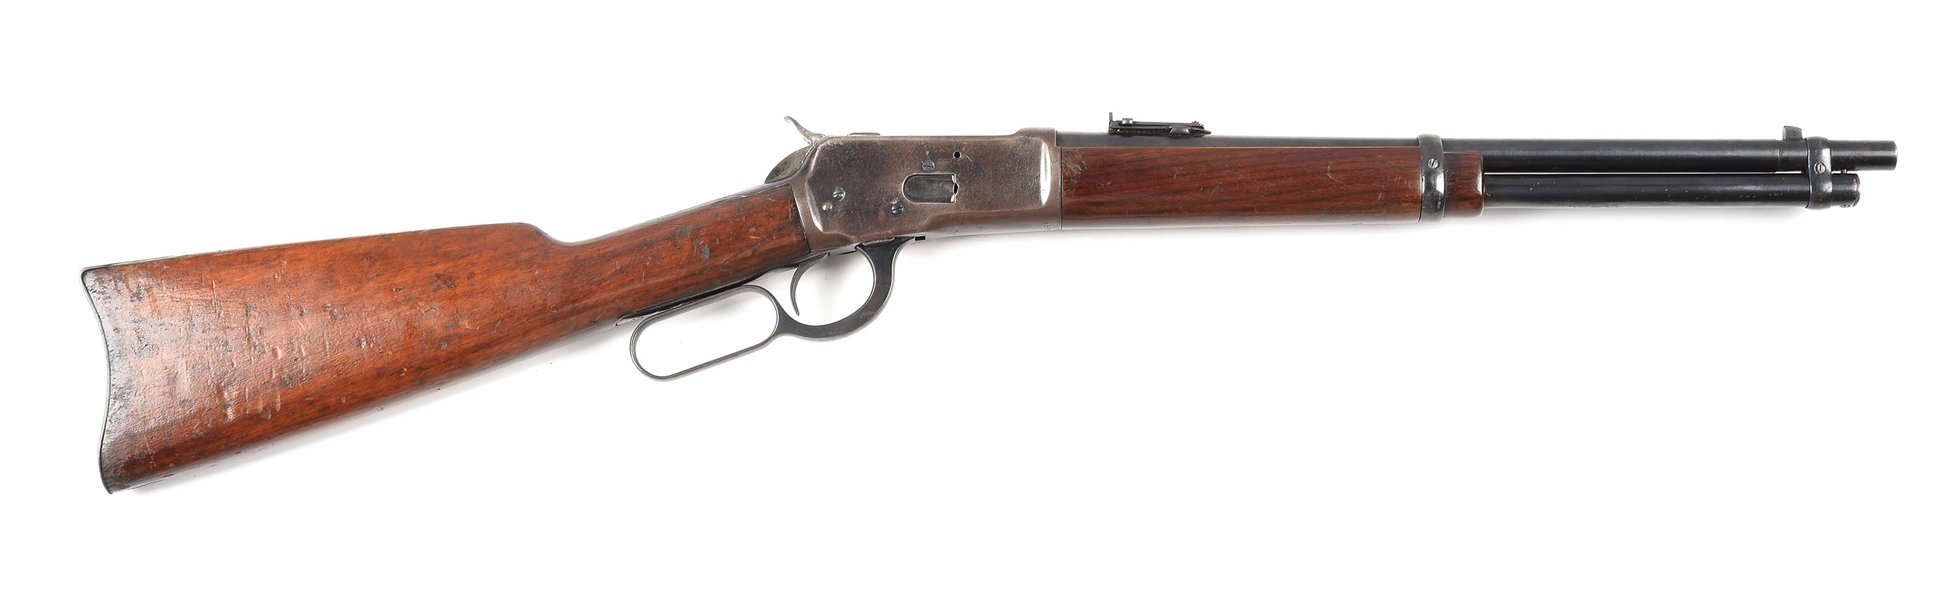 (C) SANTE FE POLICE MARKED WINCHESTER MODEL 1892 16" TRAPPER LEVER ACTION CARBINE IN .45 ACP (1925).